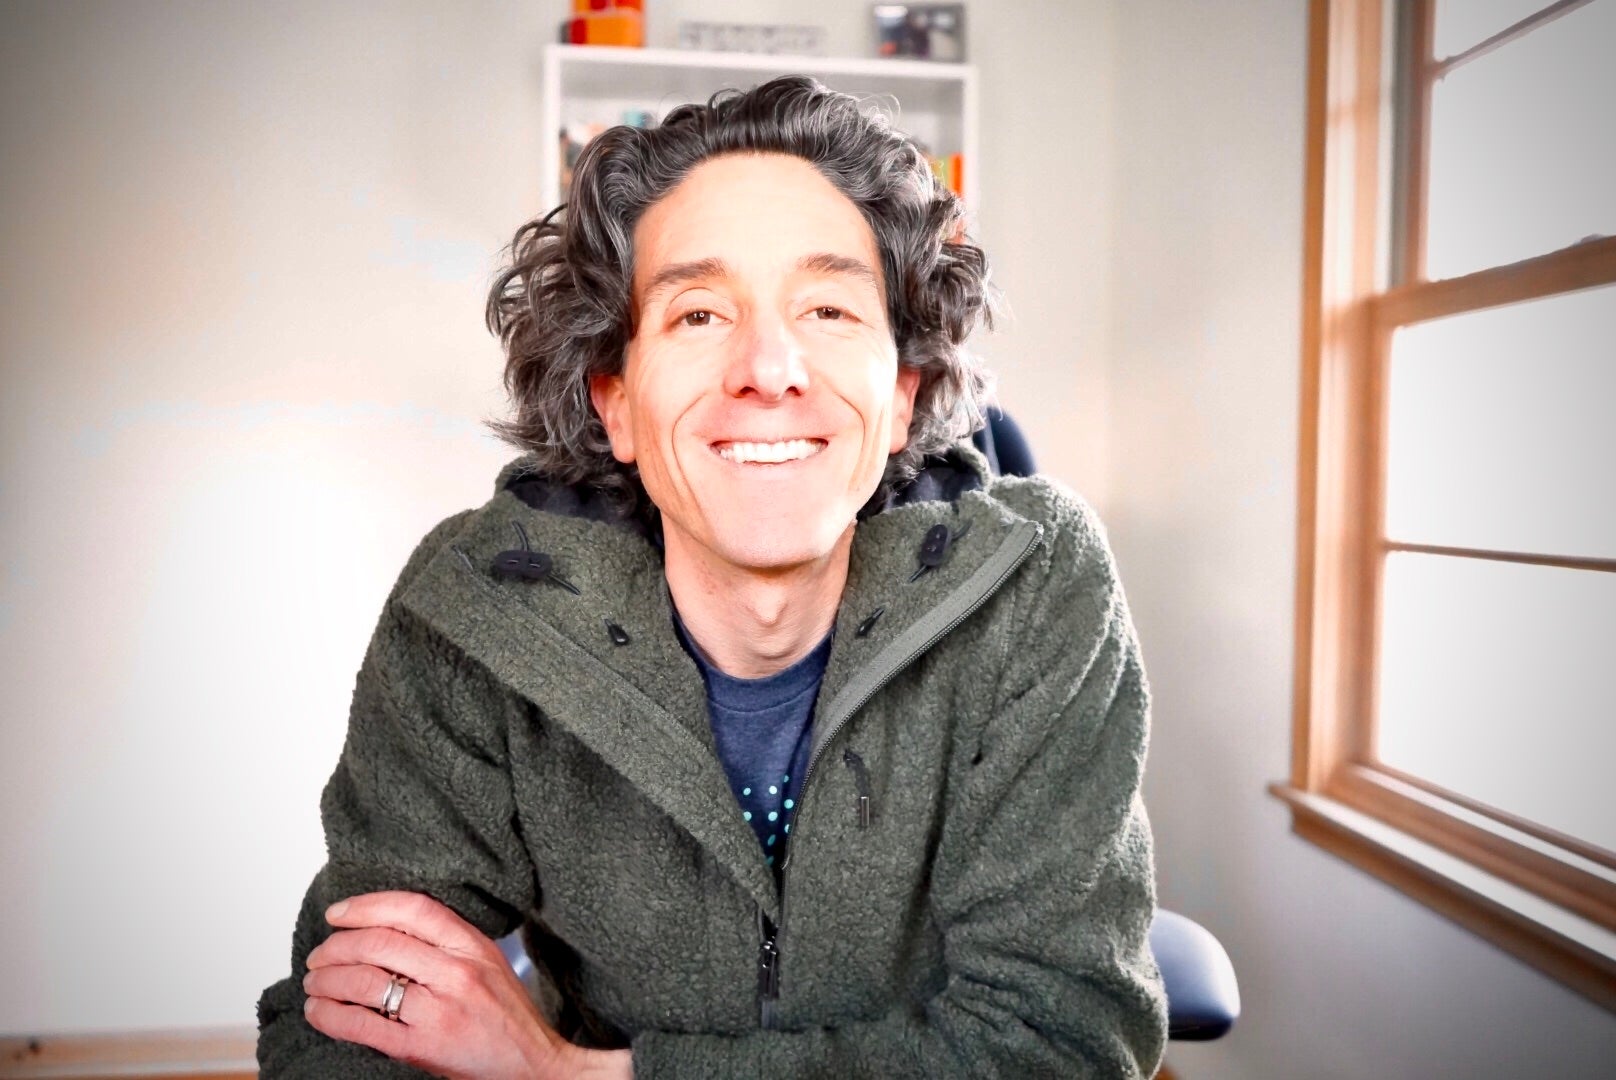 Picture of Sam in his home office smiling at the camera. Sam is a white man. He has long curly brown hair and is wearing a dark green zip up fleece hoody.